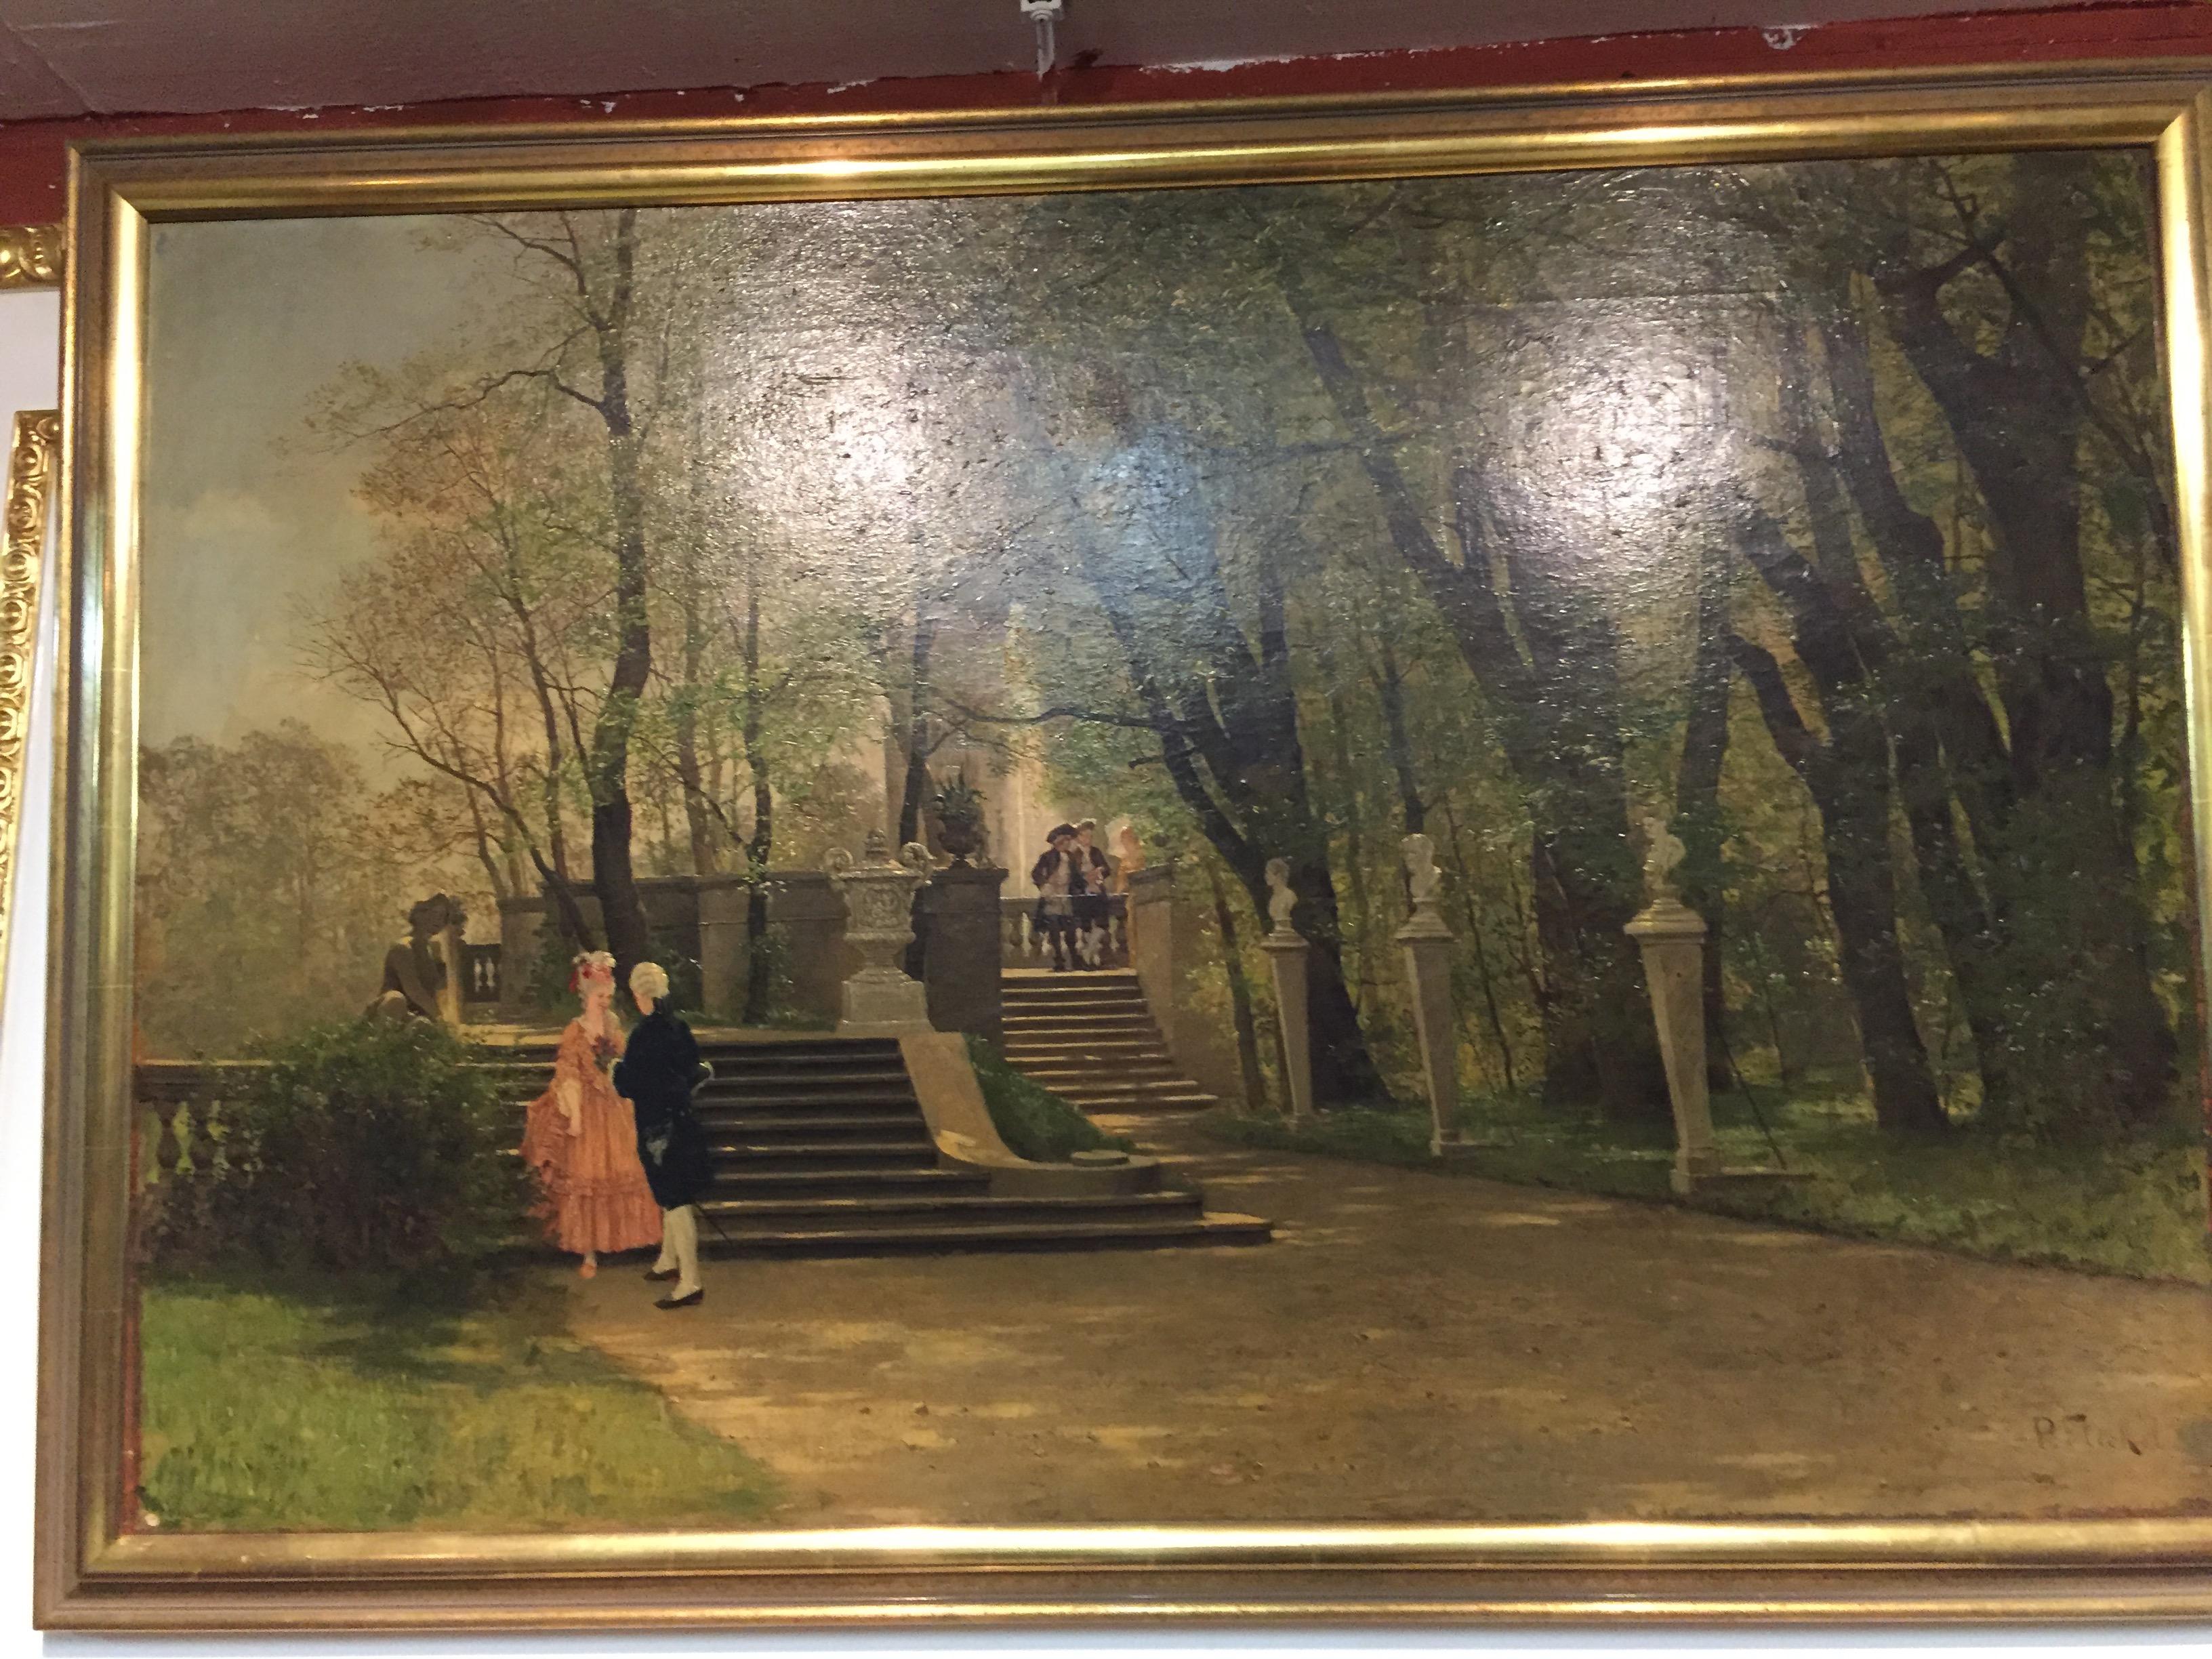 Oil Painting by P. F. Flickel in the Castle Garden 9